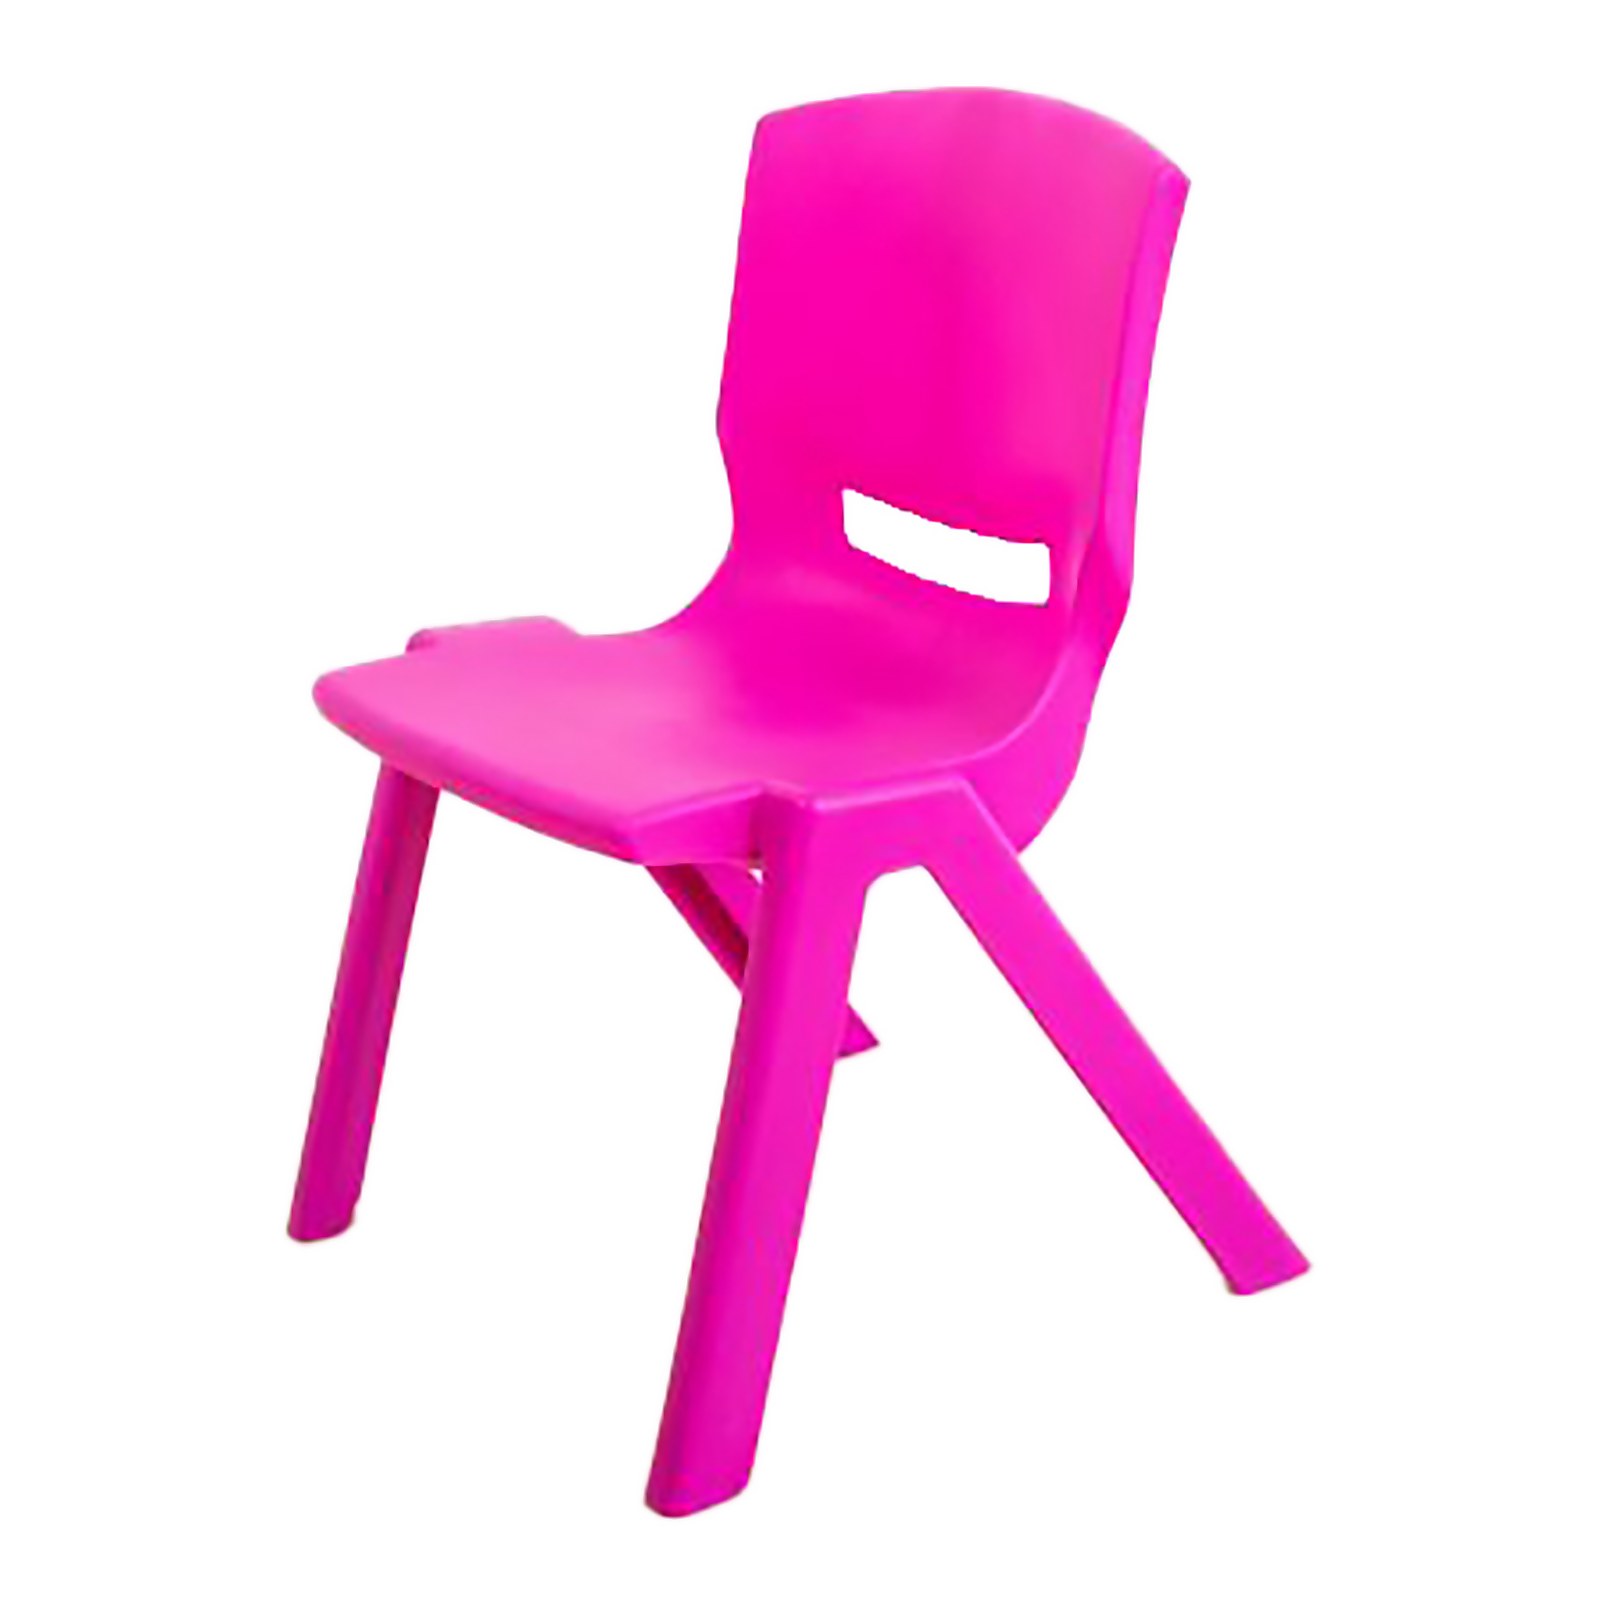 Photo of Kids Plastic Stacking Chair - Pink